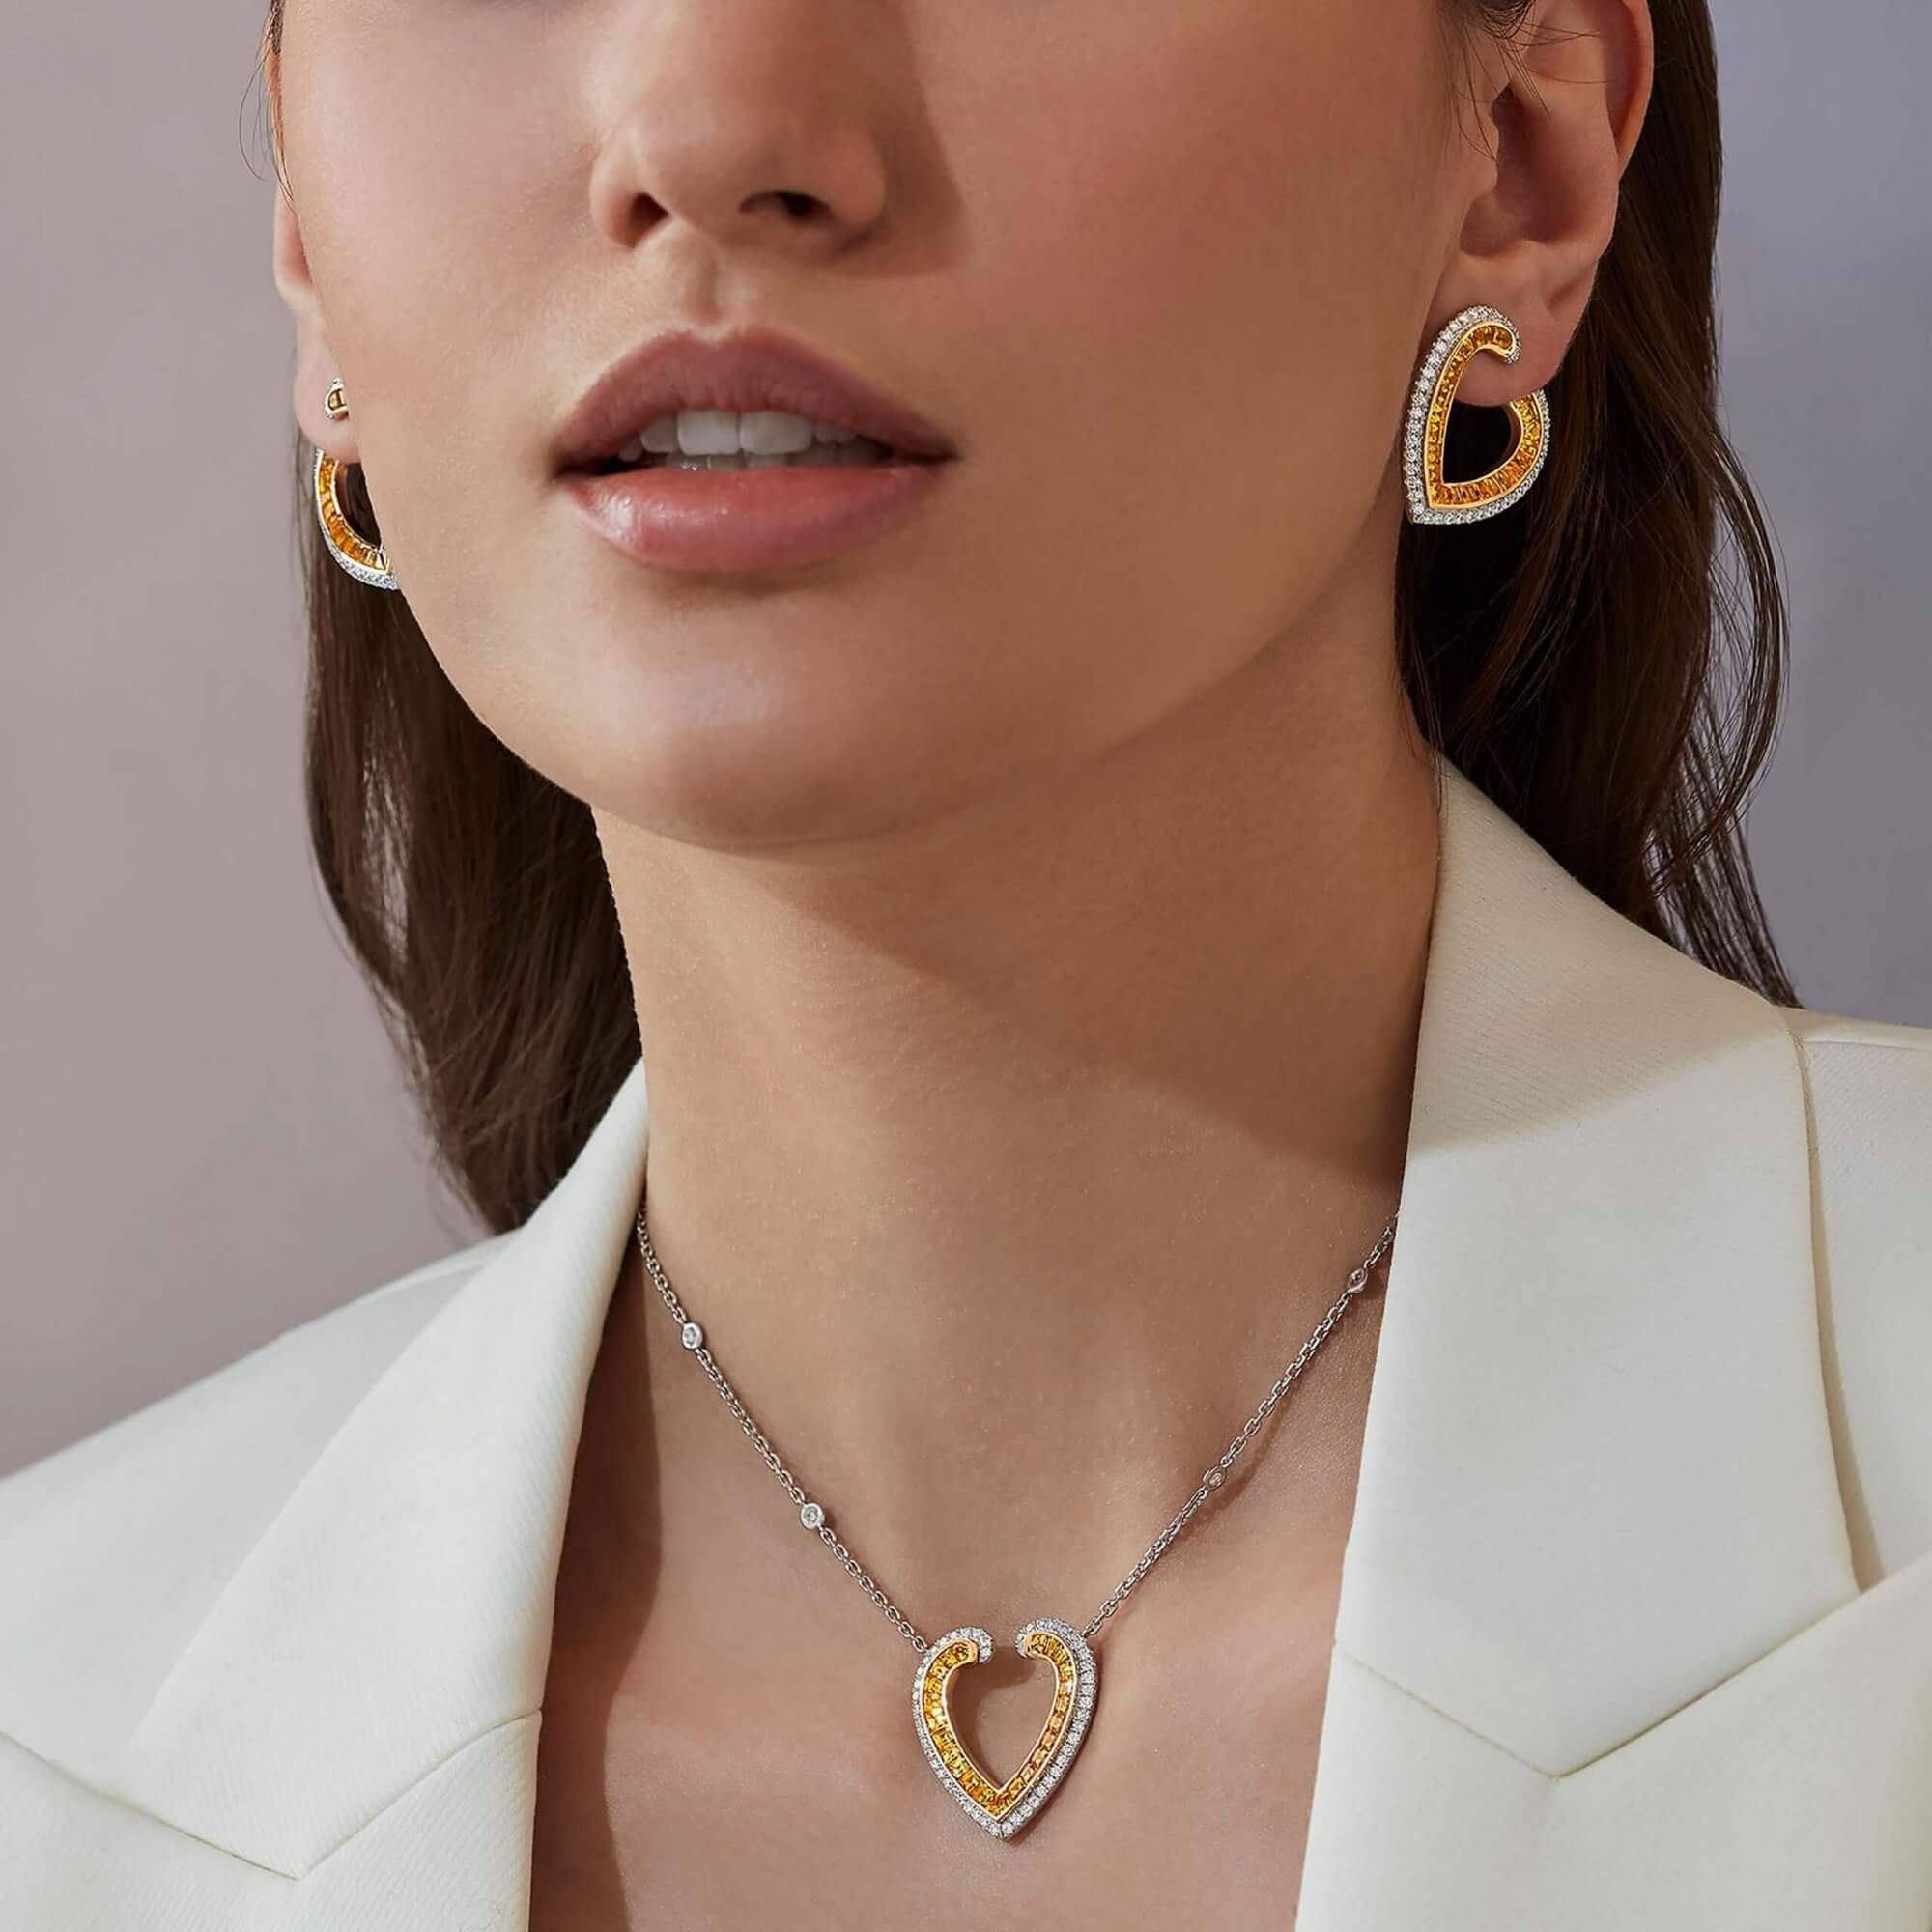 Garrard Aloria jewellery collection calibre cut Yellow sapphire pendant in 18ct white gold with diamonds 2016942 earrings 2016944On Model